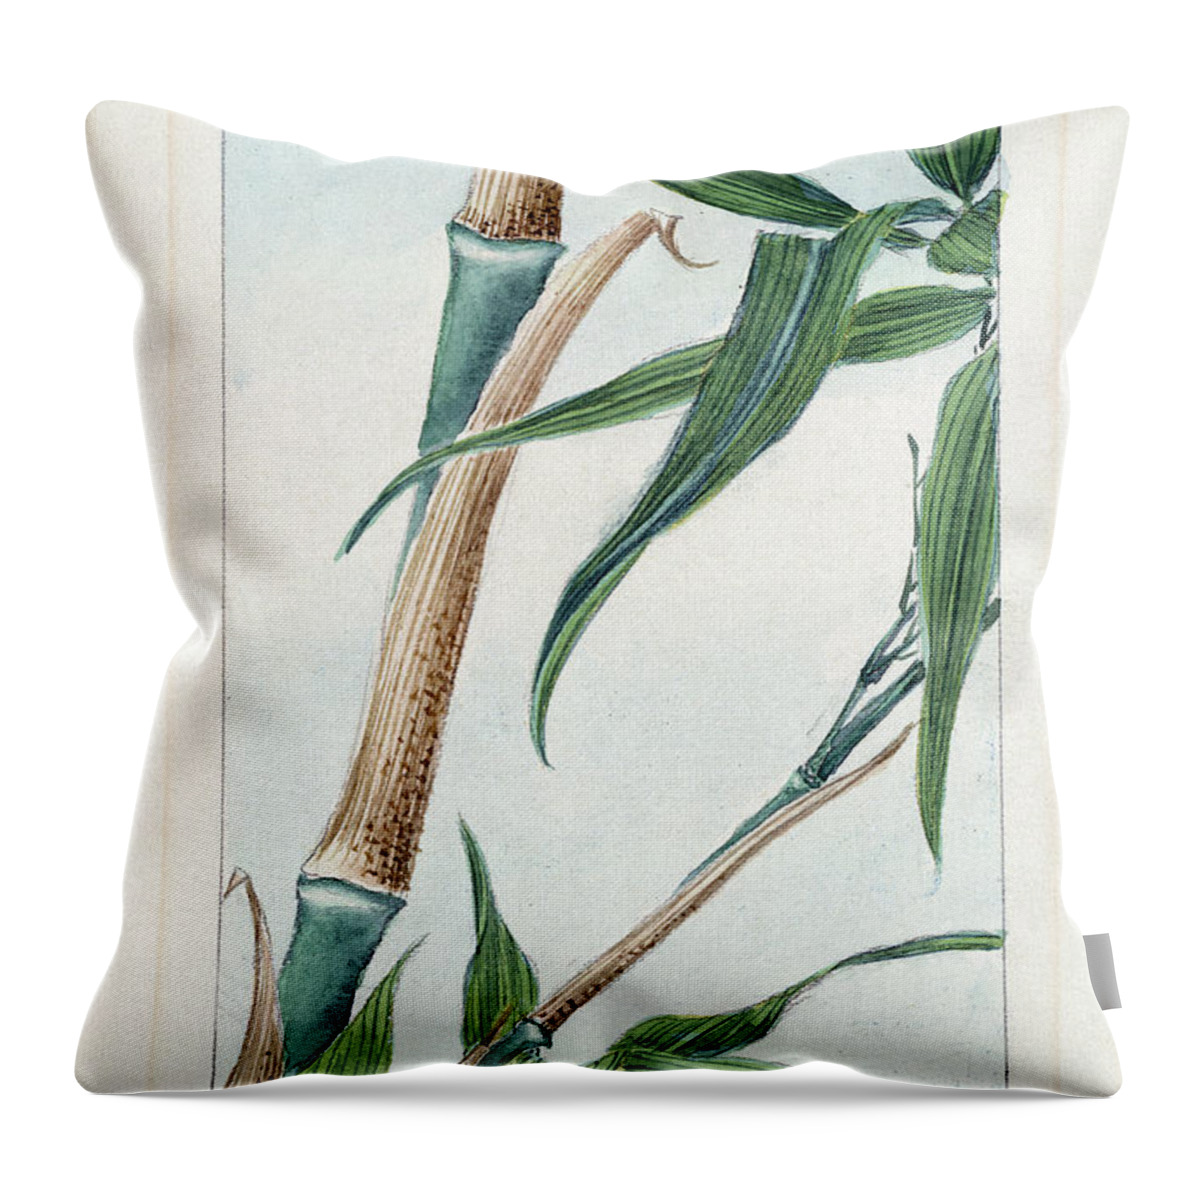 1870s Throw Pillow featuring the photograph JAPAN: BAMBOO, c1870s by Granger